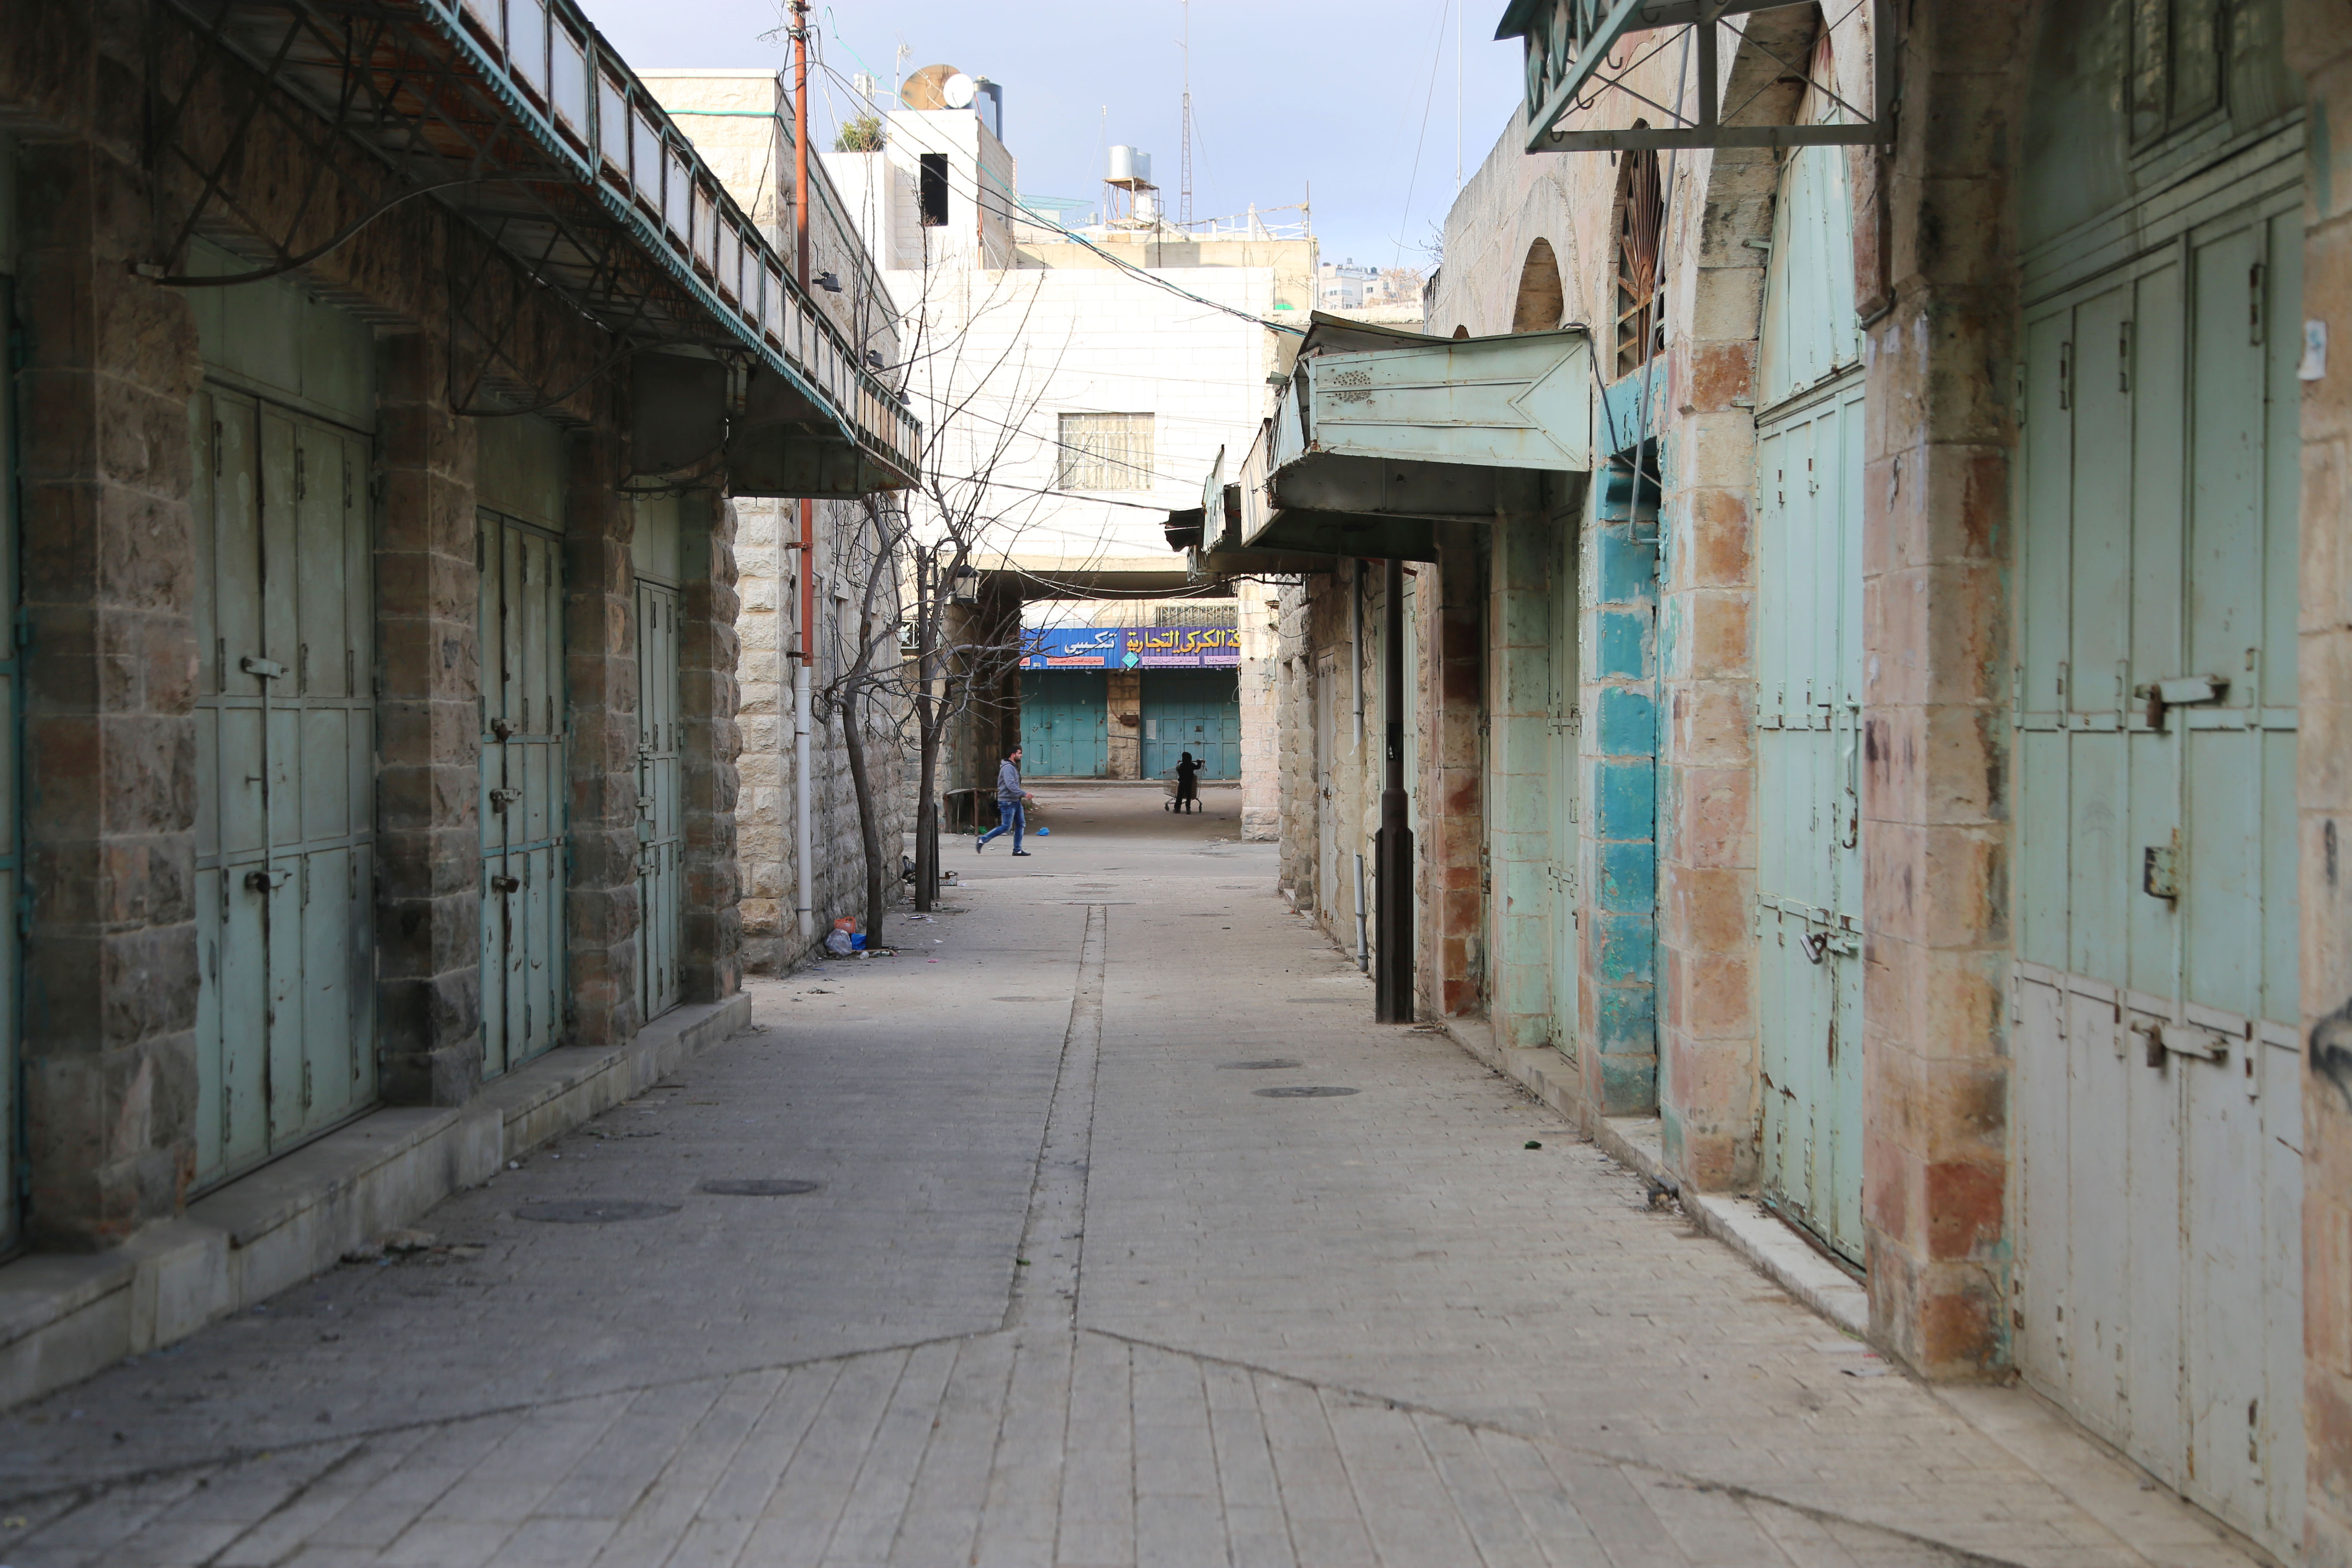 The maze-like old quarter of Hebron, a city in the West Bank home to nearly 250,000 Palestinians, used to be the region’s hub of commercial activity. Because Hebron is often regarded as the second most holy city in Judaism after Jerusalem, nearly 800 Israeli settlers have moved into the city, and violence between Israeli settlers and the city’s Palestinian inhabitants has transformed the downtown area into a ghost town. Shops have shuttered, roads have been closed to Palestinians, and the whole area feels eerily silent.